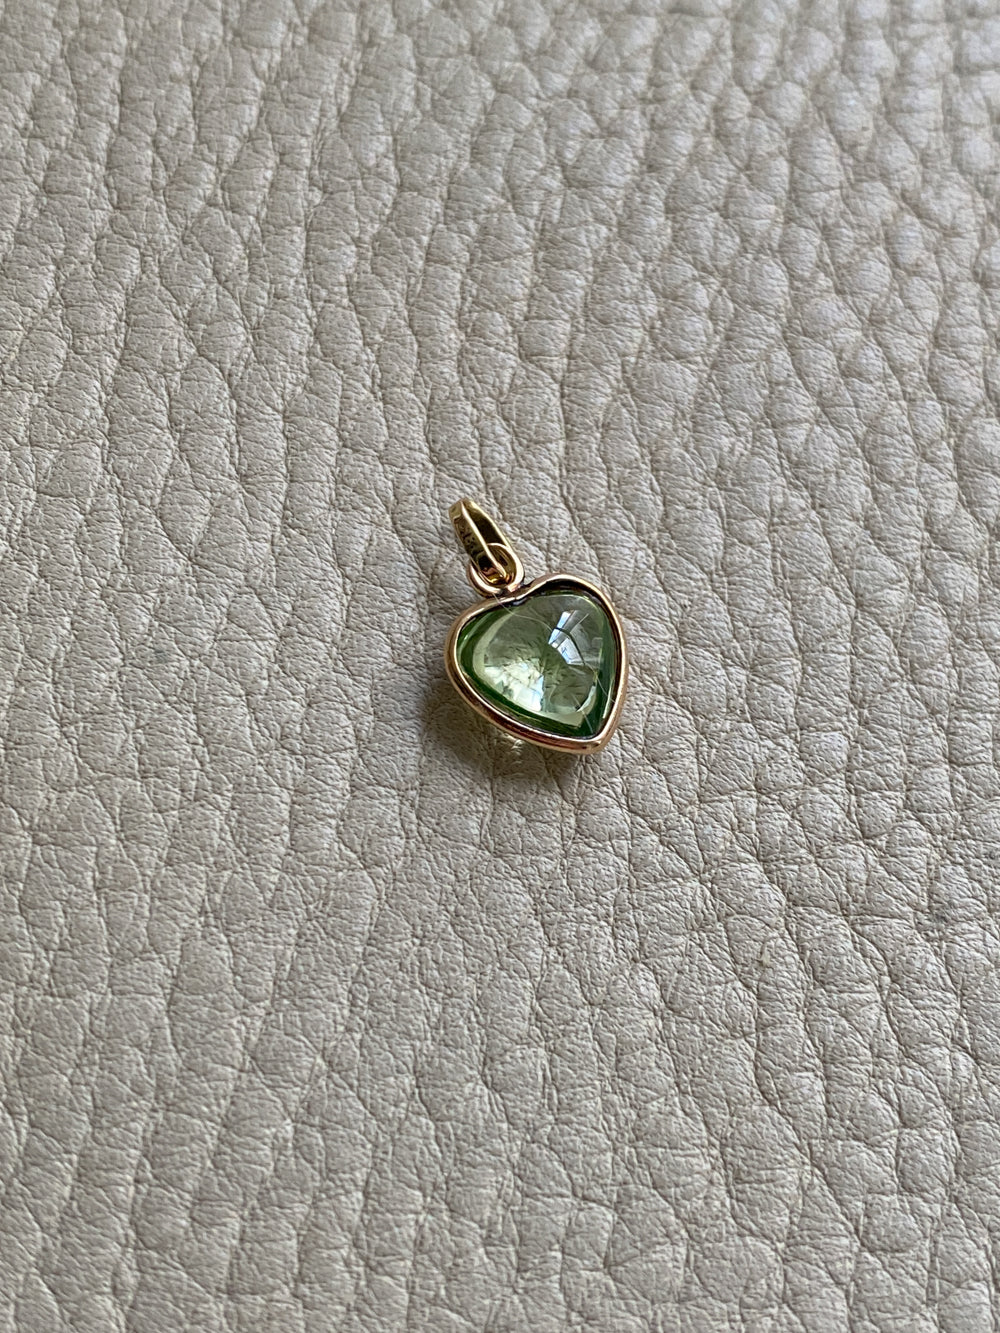 18k gold transparent green stone puffy heart pendant or charm